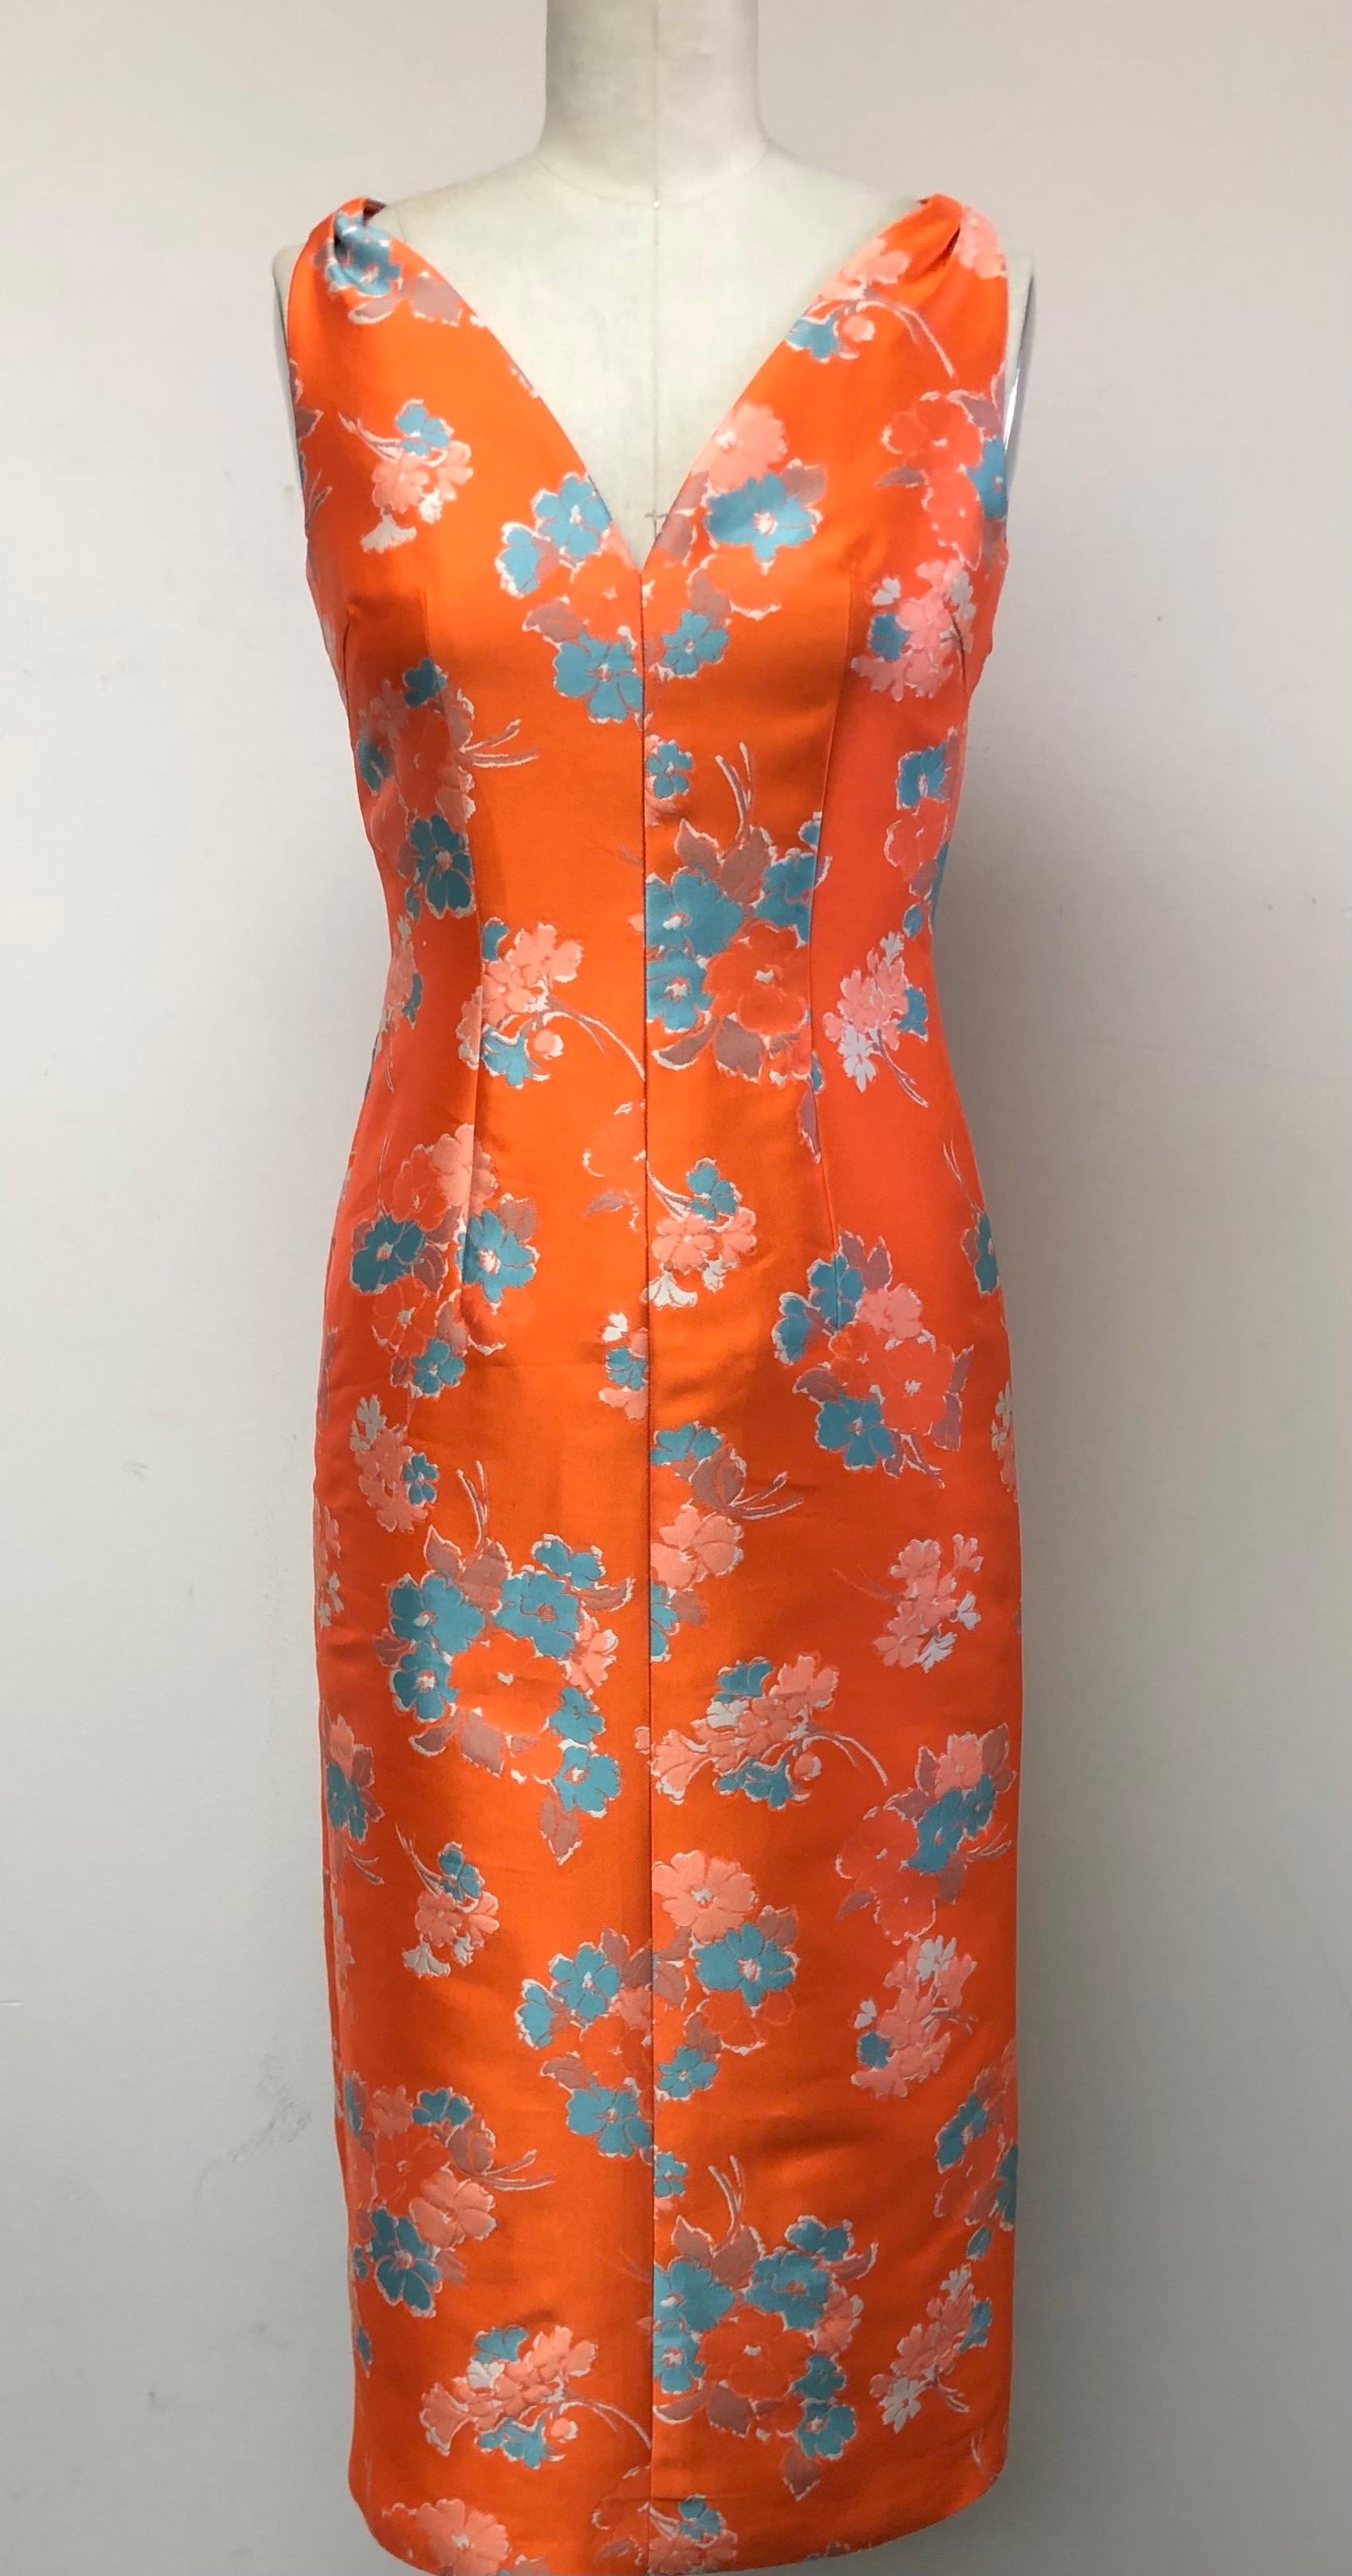 V Neck Slim Dress and Jacket in Delightful Orange and Blue Floral Print  In Excellent Condition For Sale In Los Angeles, CA